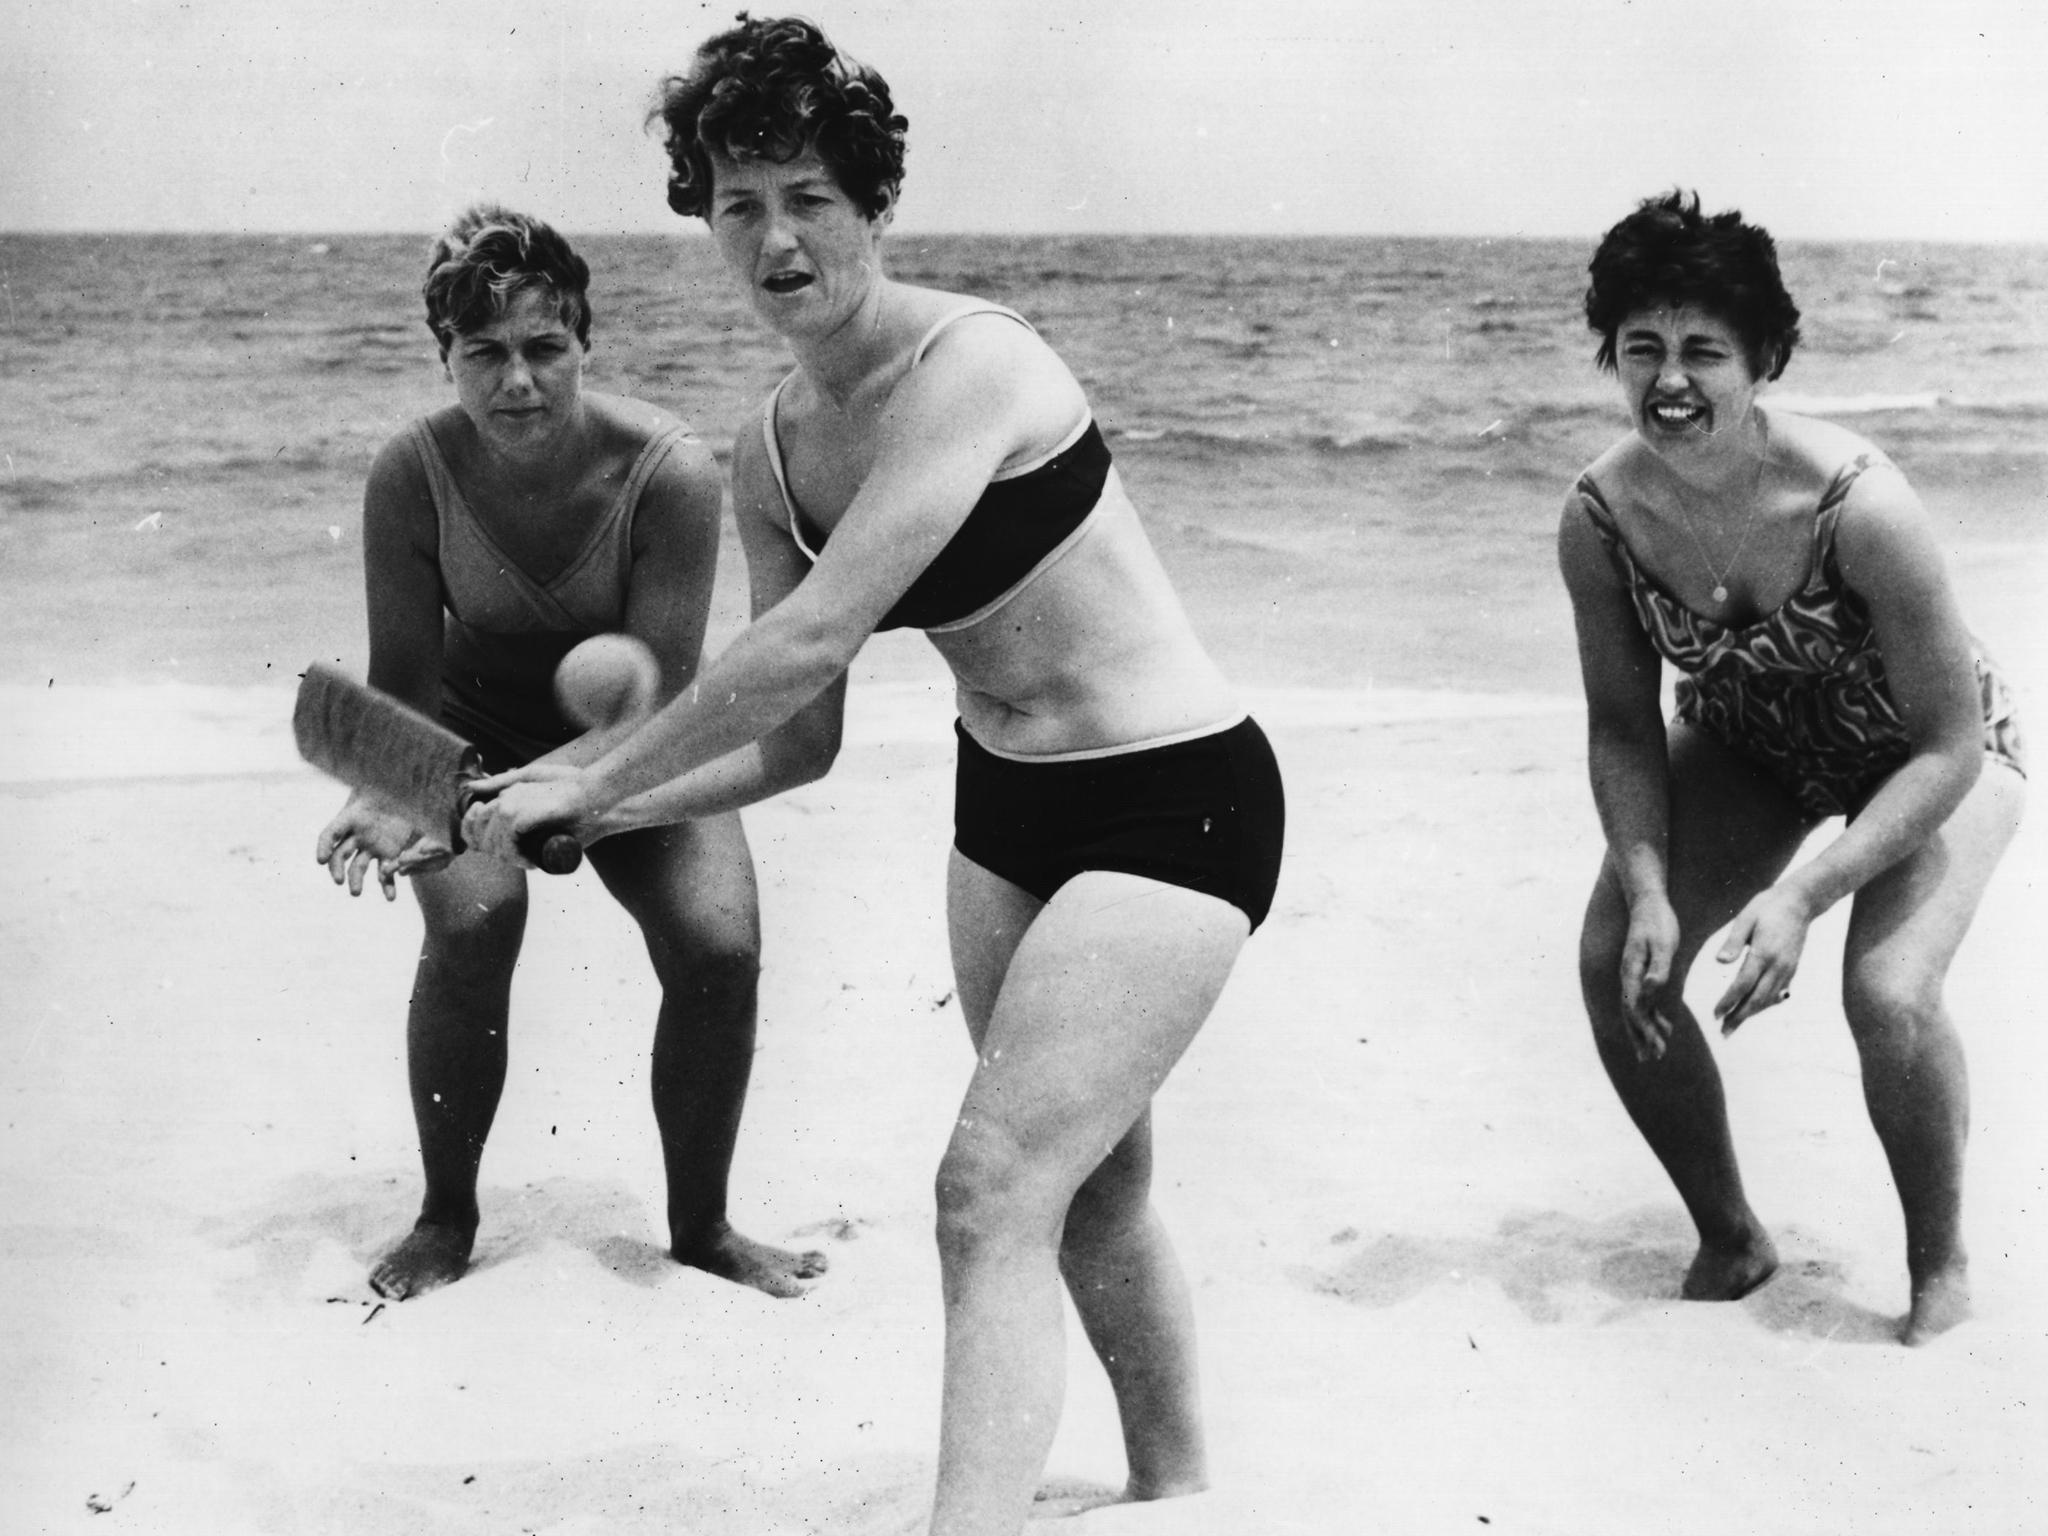 English cricketers Rachael Heyhoe Flint (batting), Edna Barker, left, and Audrey Disbury practising on Perth beach during their tour of Australia